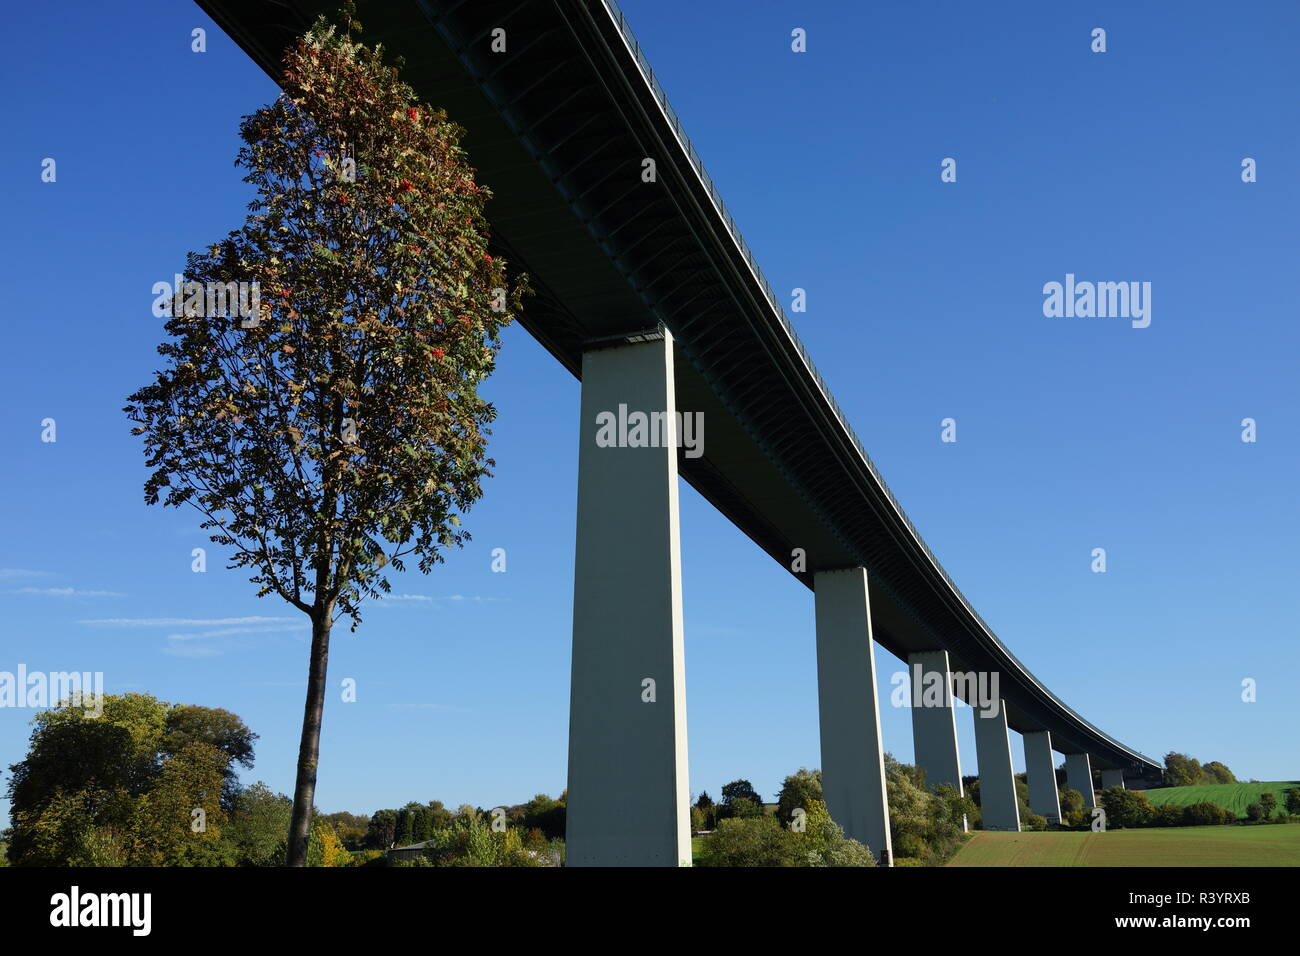 View from below of a motorway bridge with mighty, high white pillars, in the foreground a small tree Stock Photo